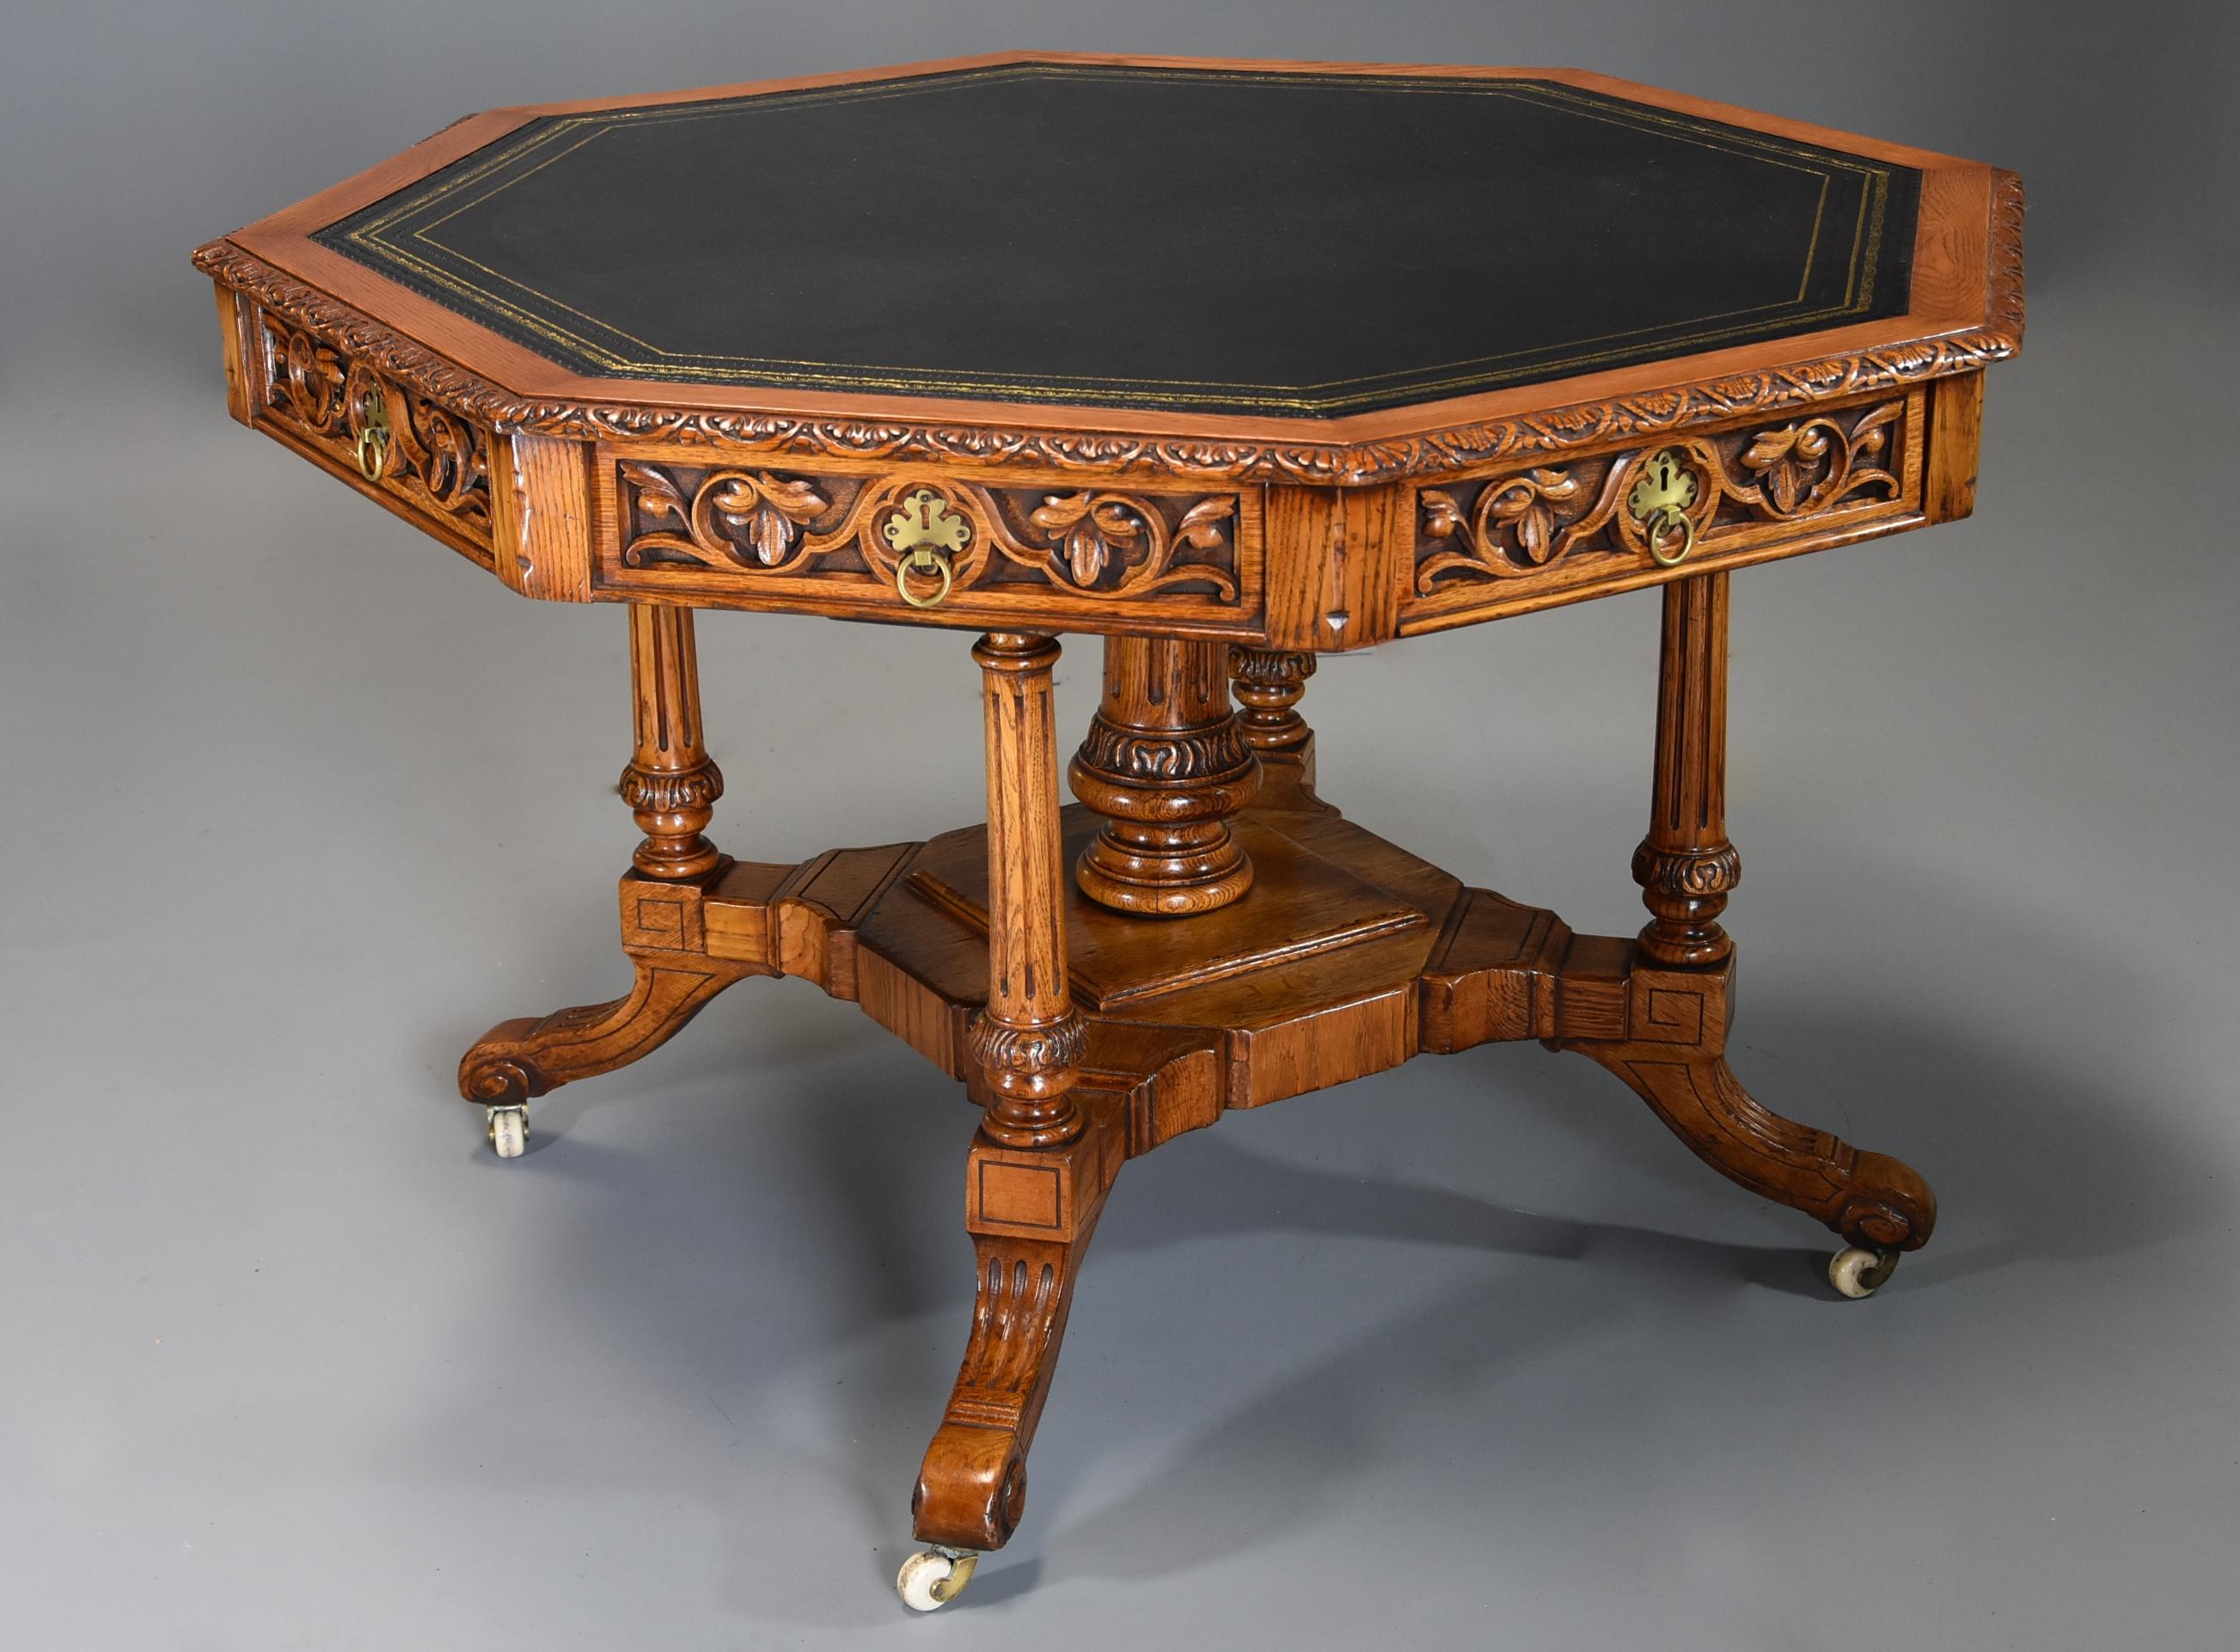 A mid-late 19th century oak octagonal library table by T.H. Filmer & Sons, Oxford St, London.

This unusual library table consists of a black tooled leather top surrounded by a crossbanded and carved oak edge.

This leads down to the drawers,